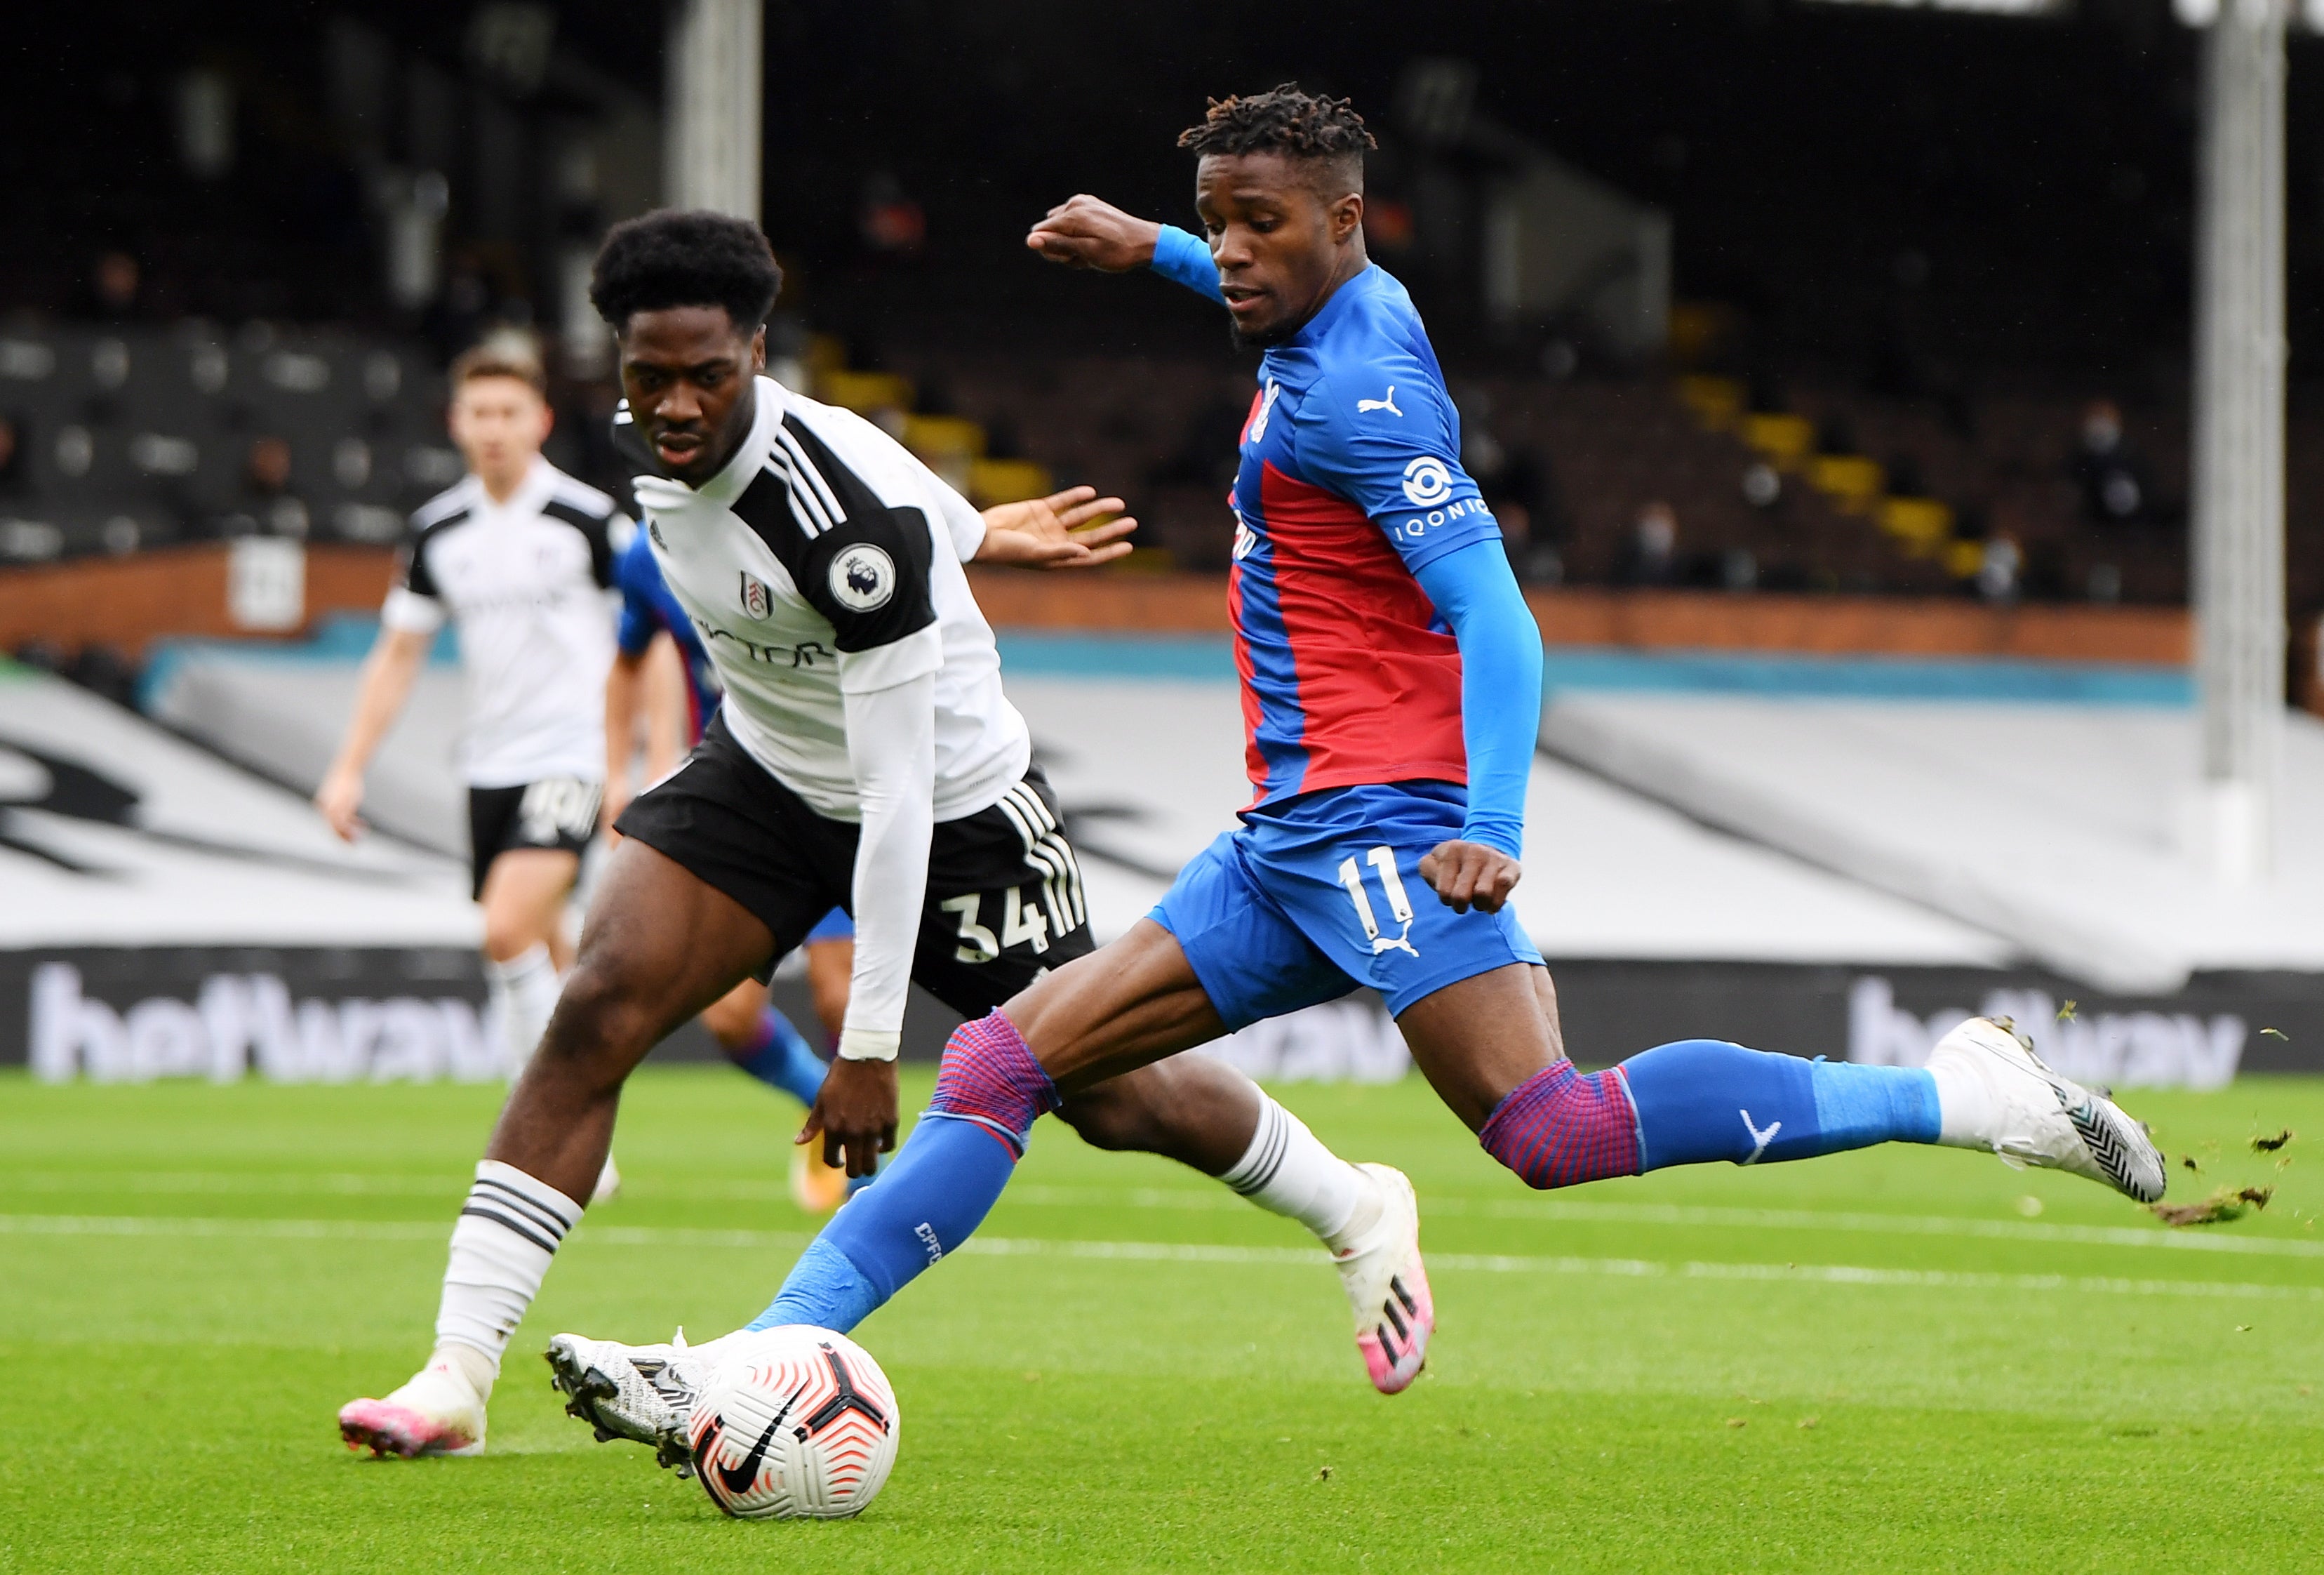 Wilfried Zaha was the star of the show for Palace